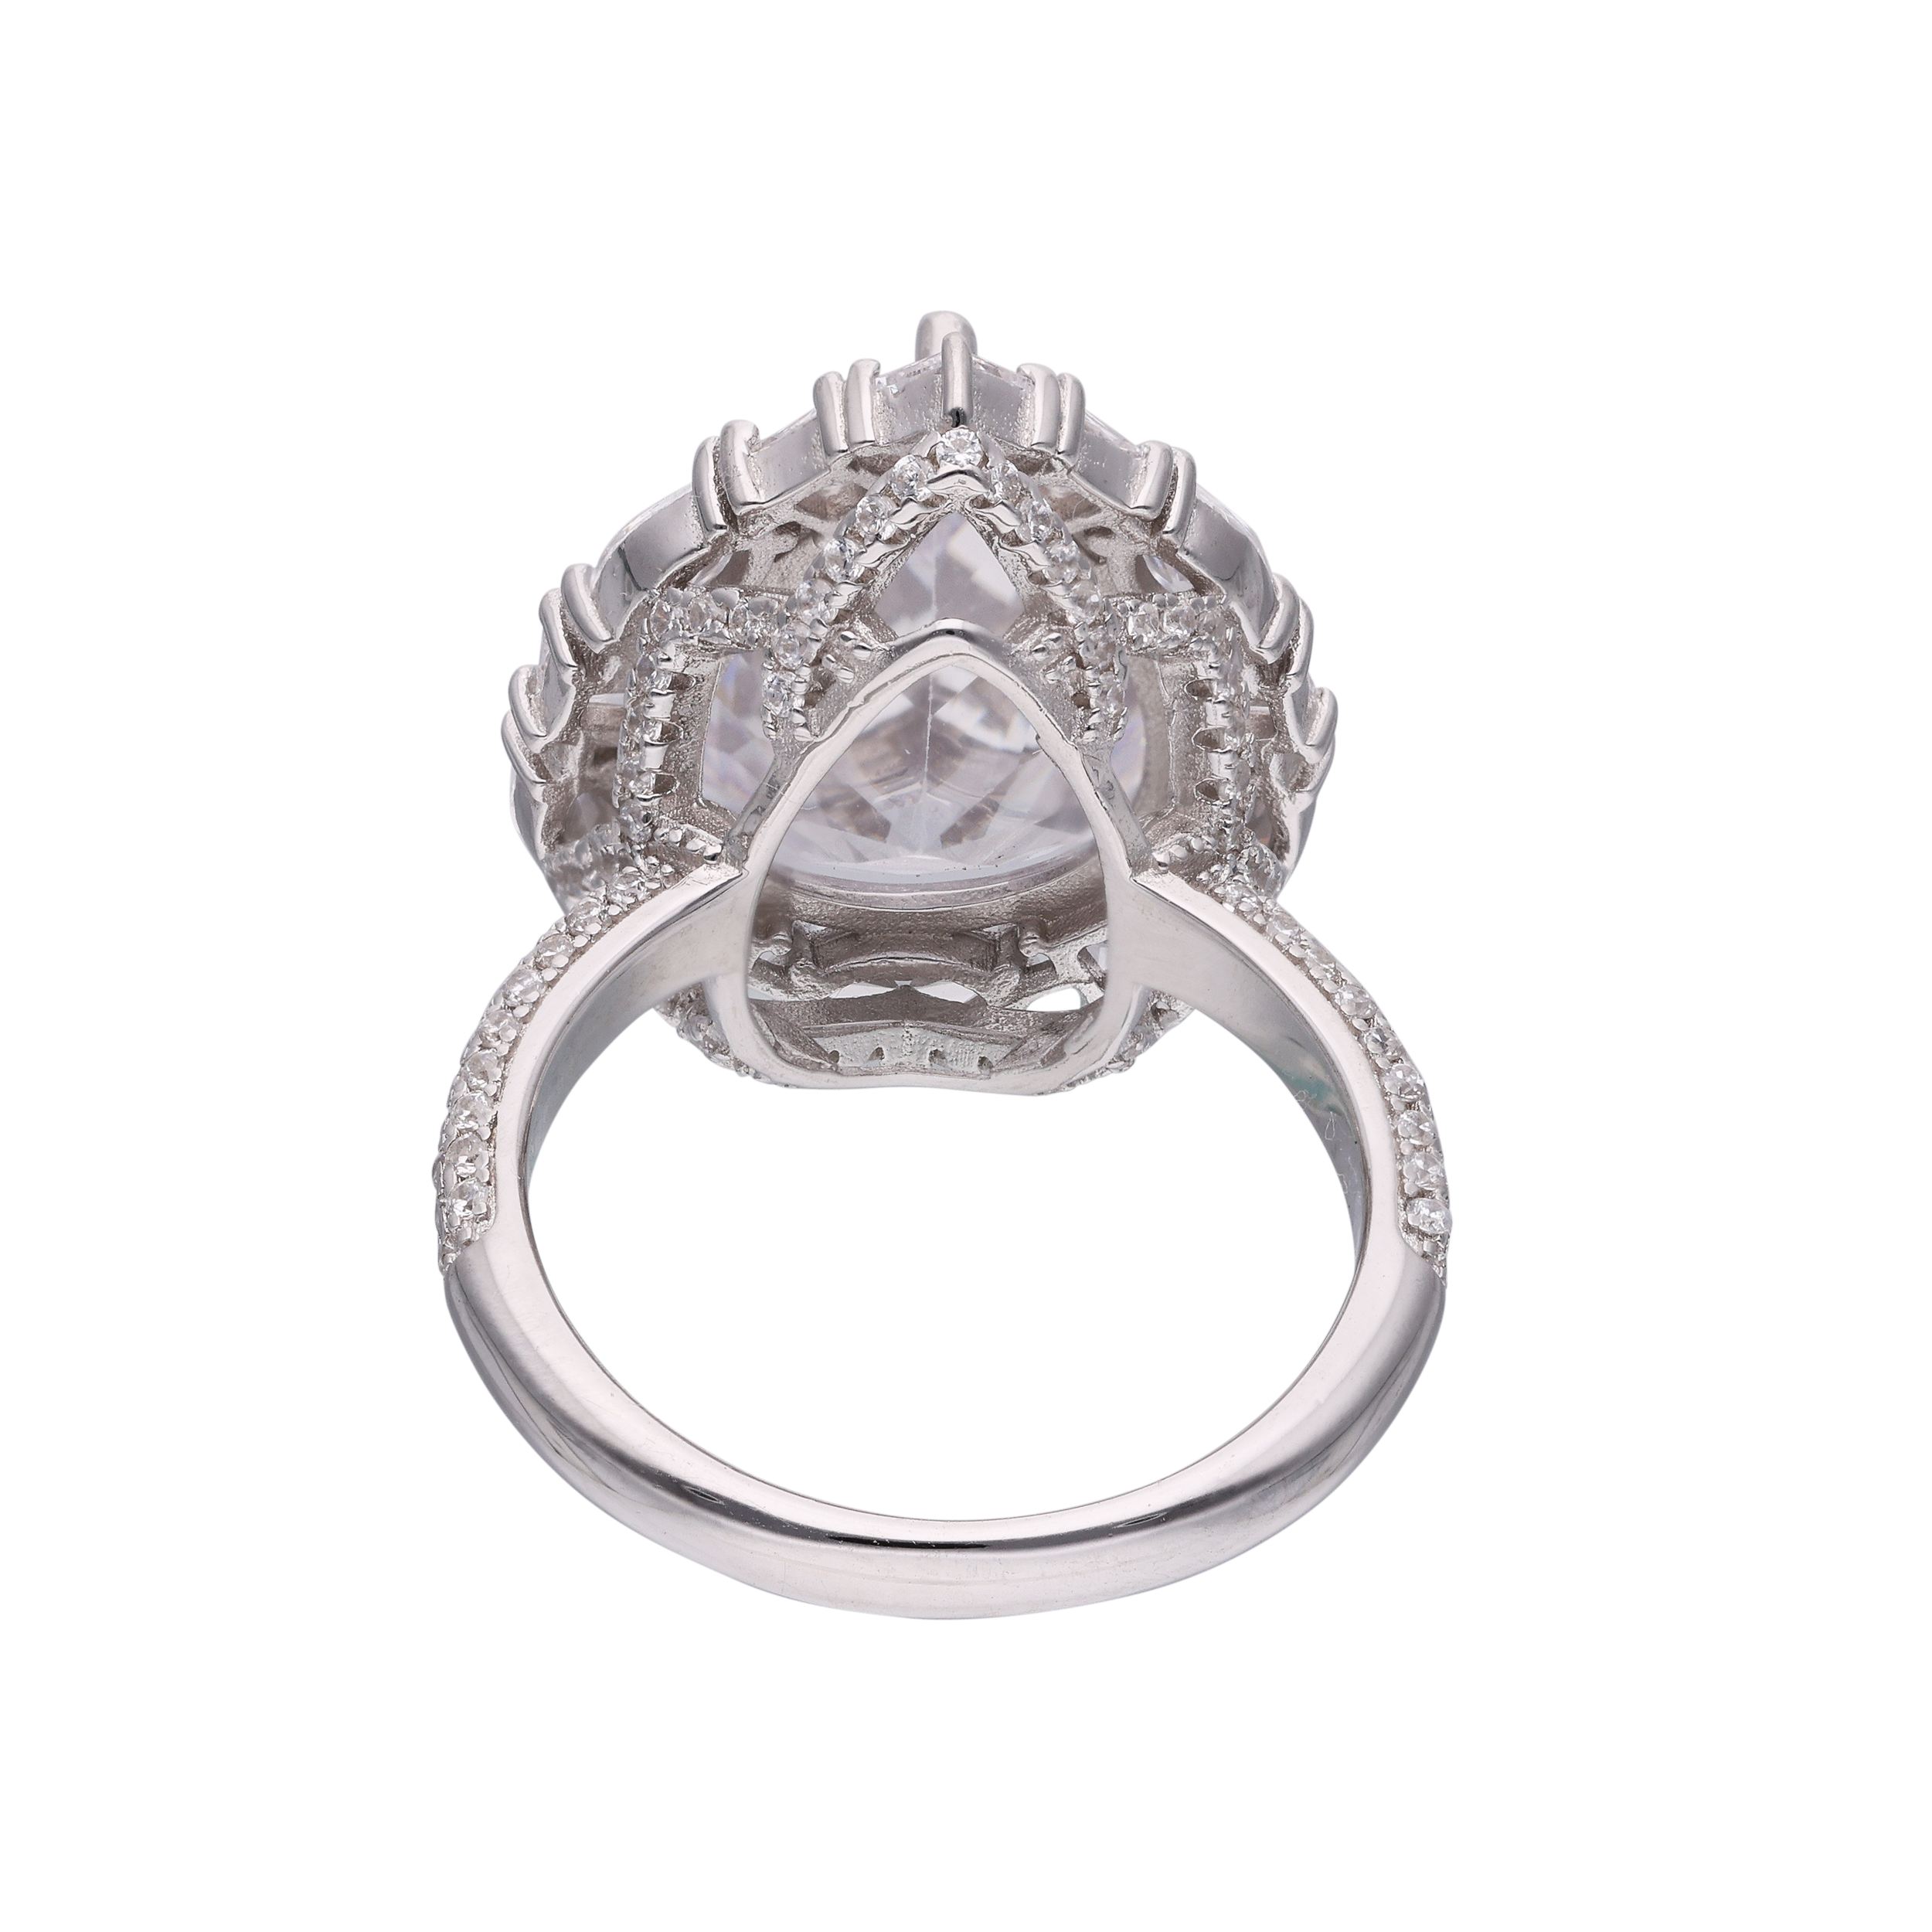 Pear-Shaped Solitaire Silver Ring | SKU: 0019211619, 0019211602